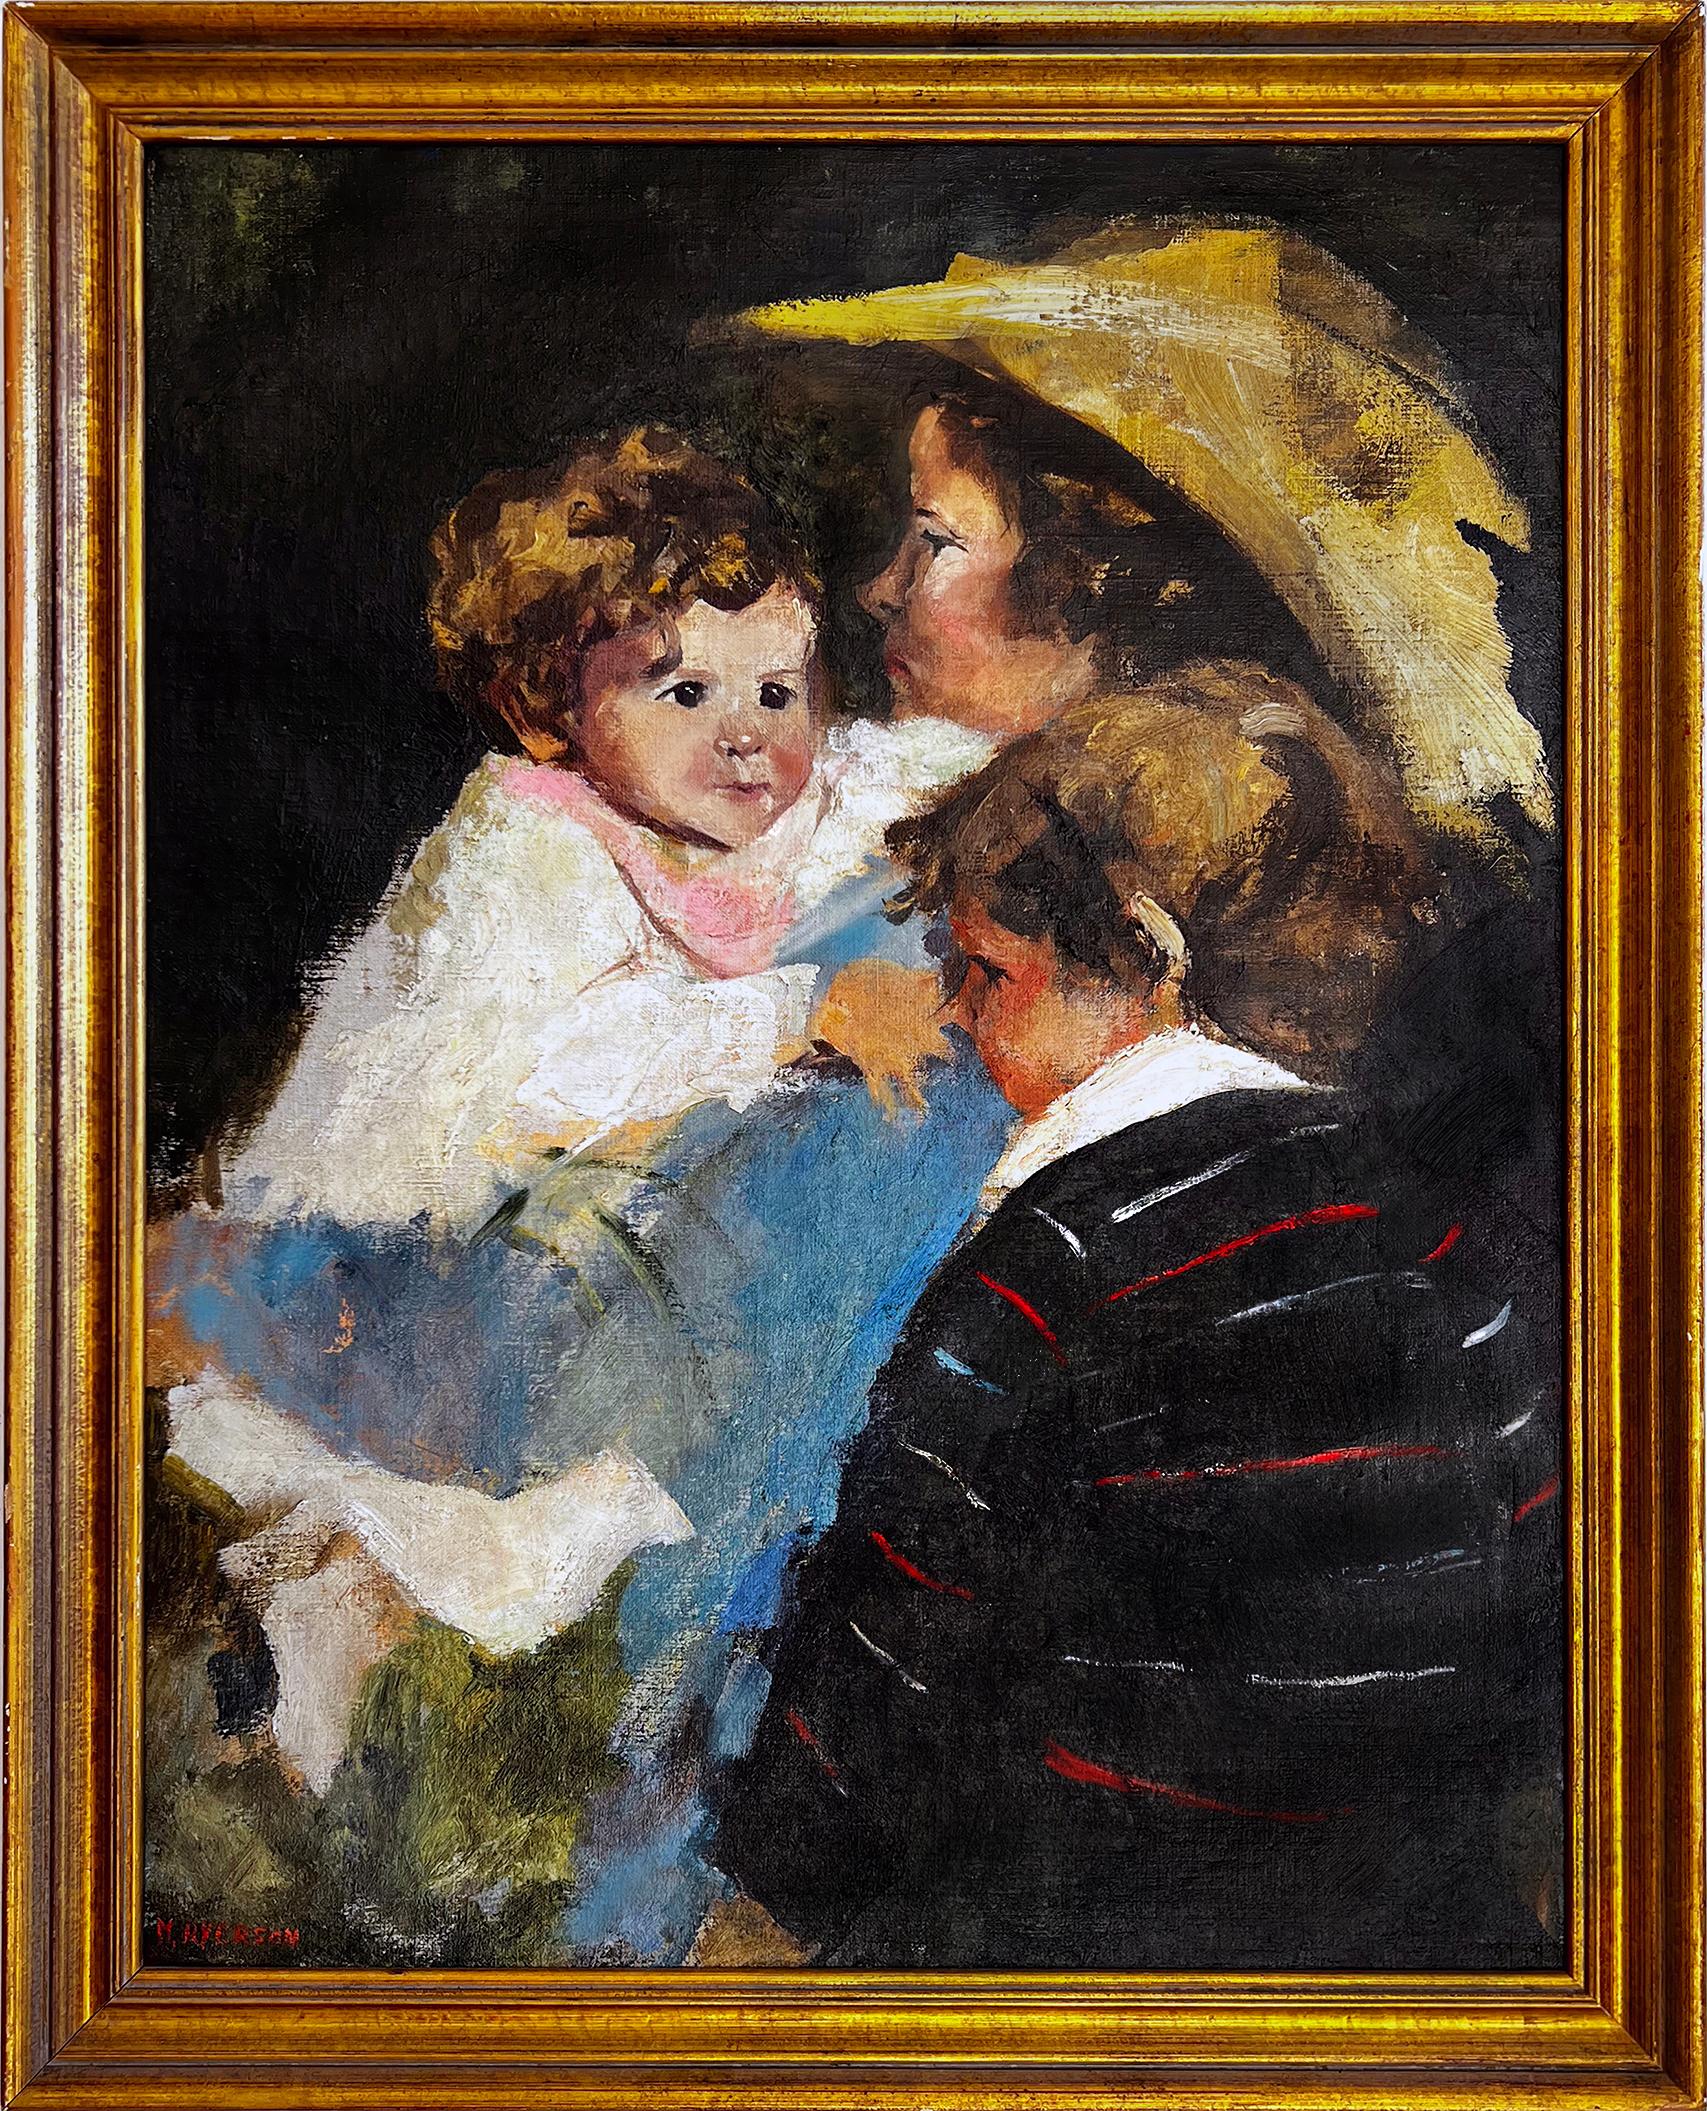 Margery Austen Ryerson Portrait Painting - Tender Family Portrait - Mother and Child, Student of Robert Henri